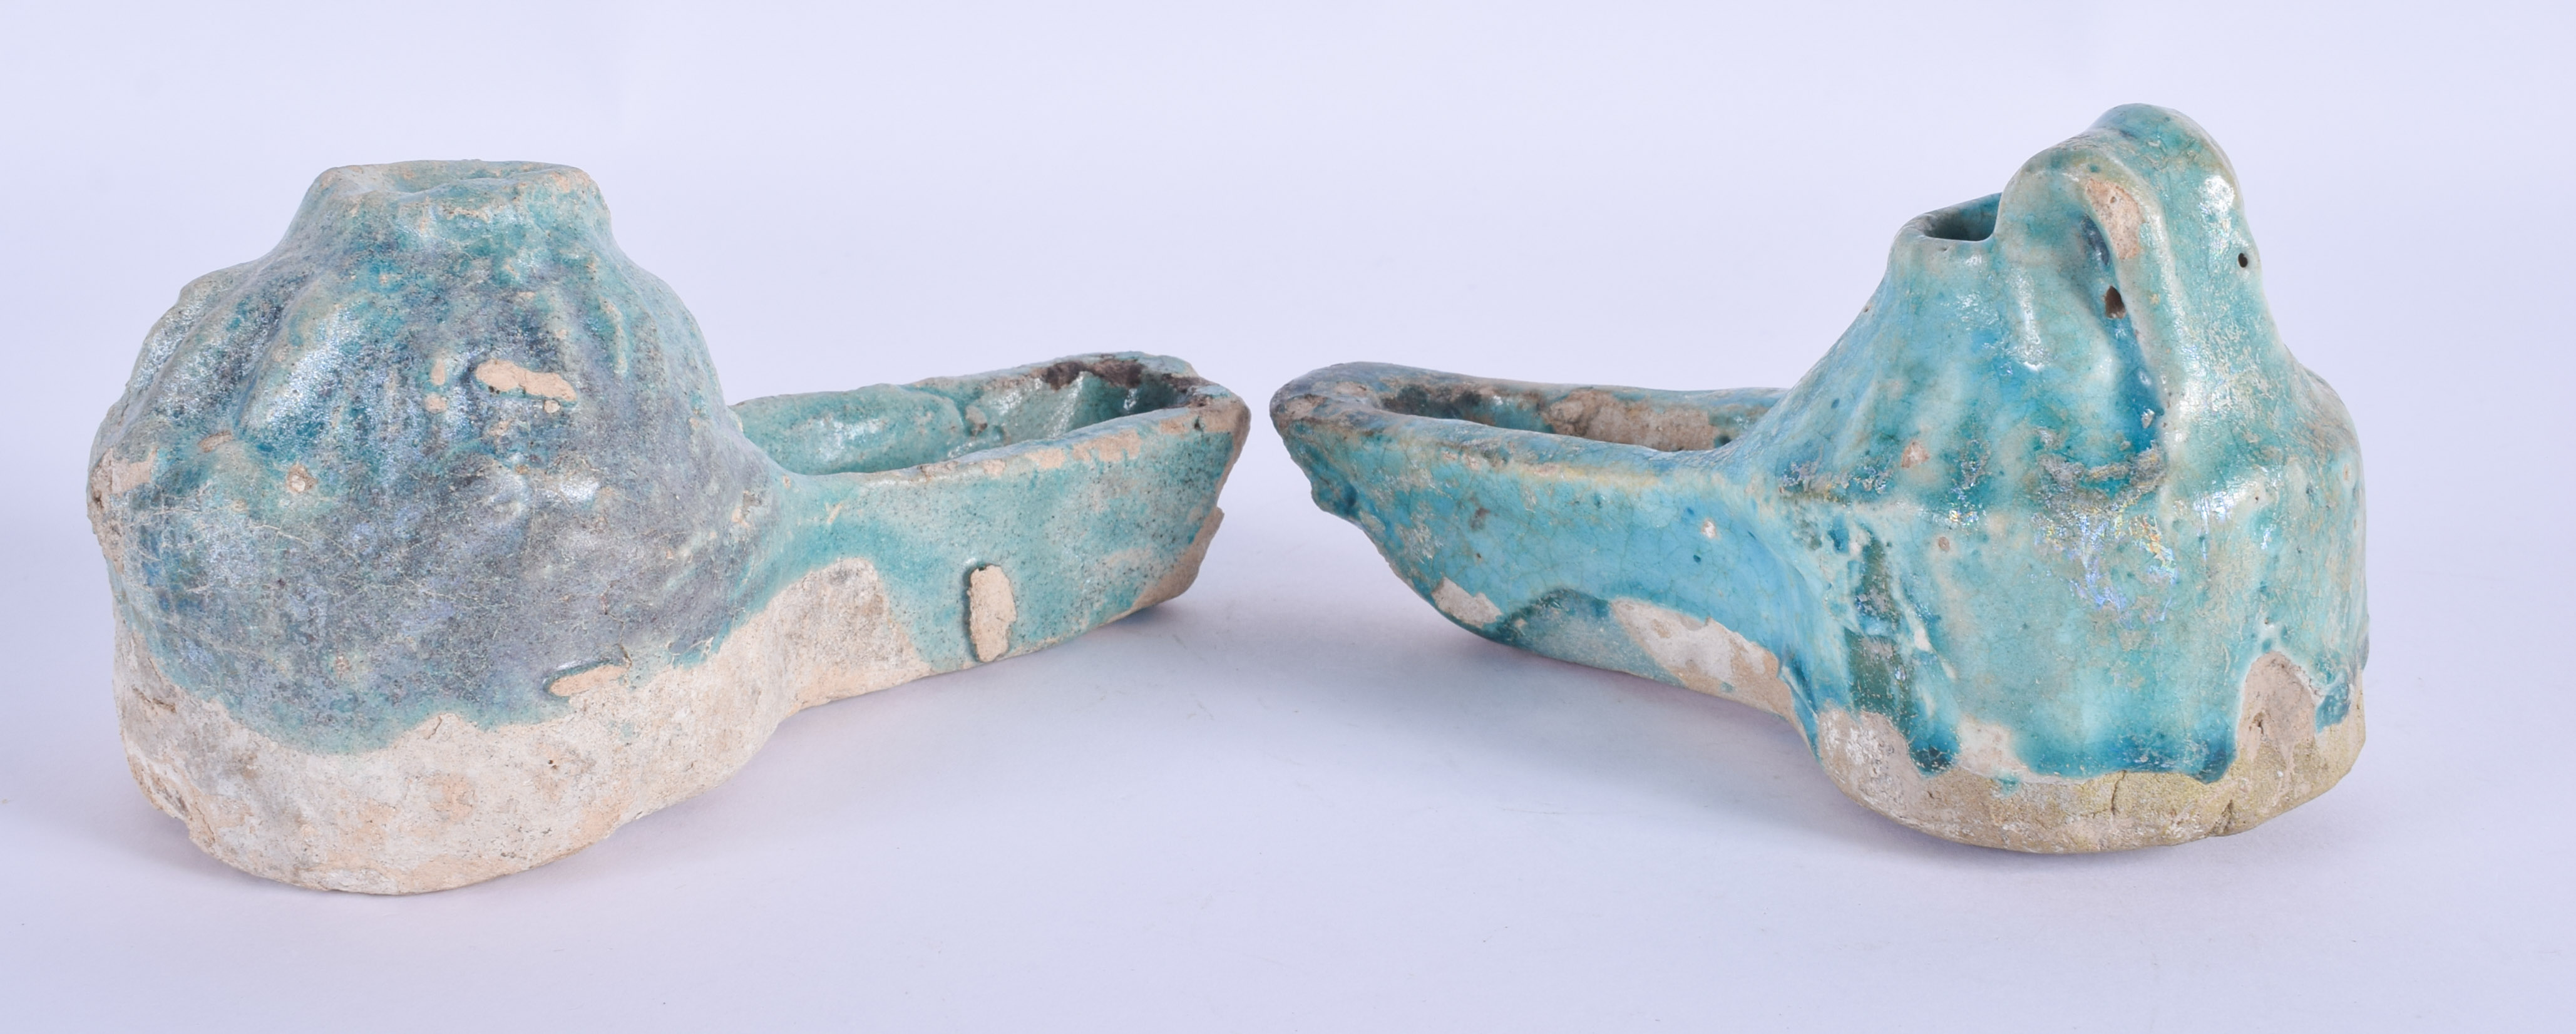 A PAIR OF 12TH/13TH CENTURY PERSIAN TURQUOISE GLAZED OIL LAMPS Iran. 14 cm x 7 cm. (2) - Image 2 of 4